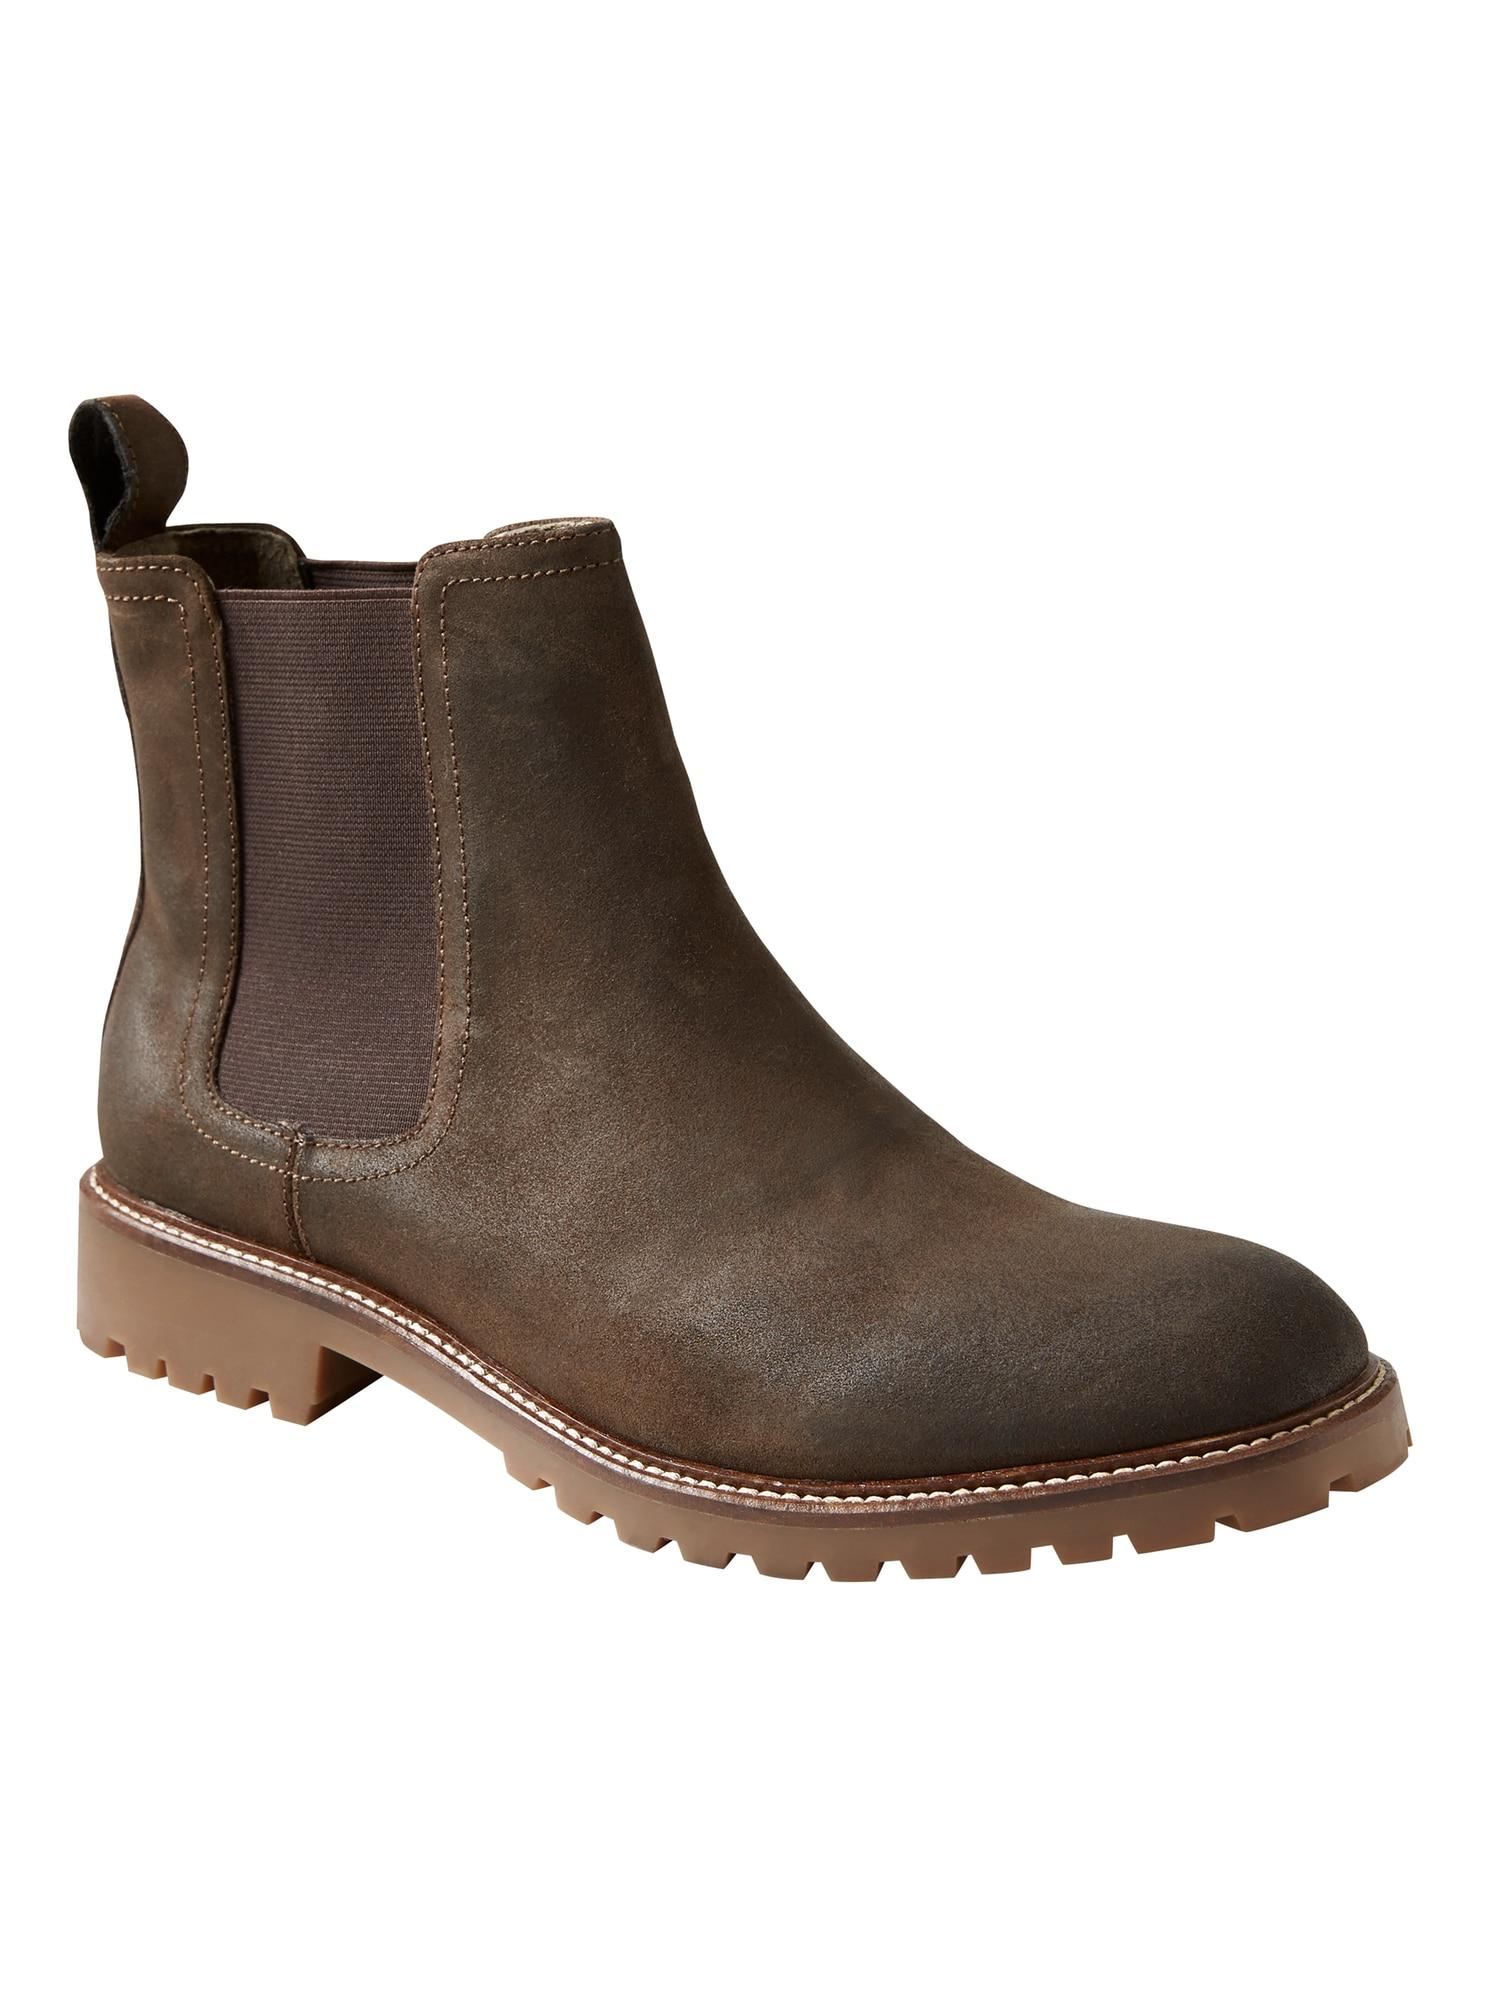 Banana Republic Leather Tanner Lug Sole Chelsea Boot in Tan Brown Nubuck  Leather (Brown) for Men - Lyst